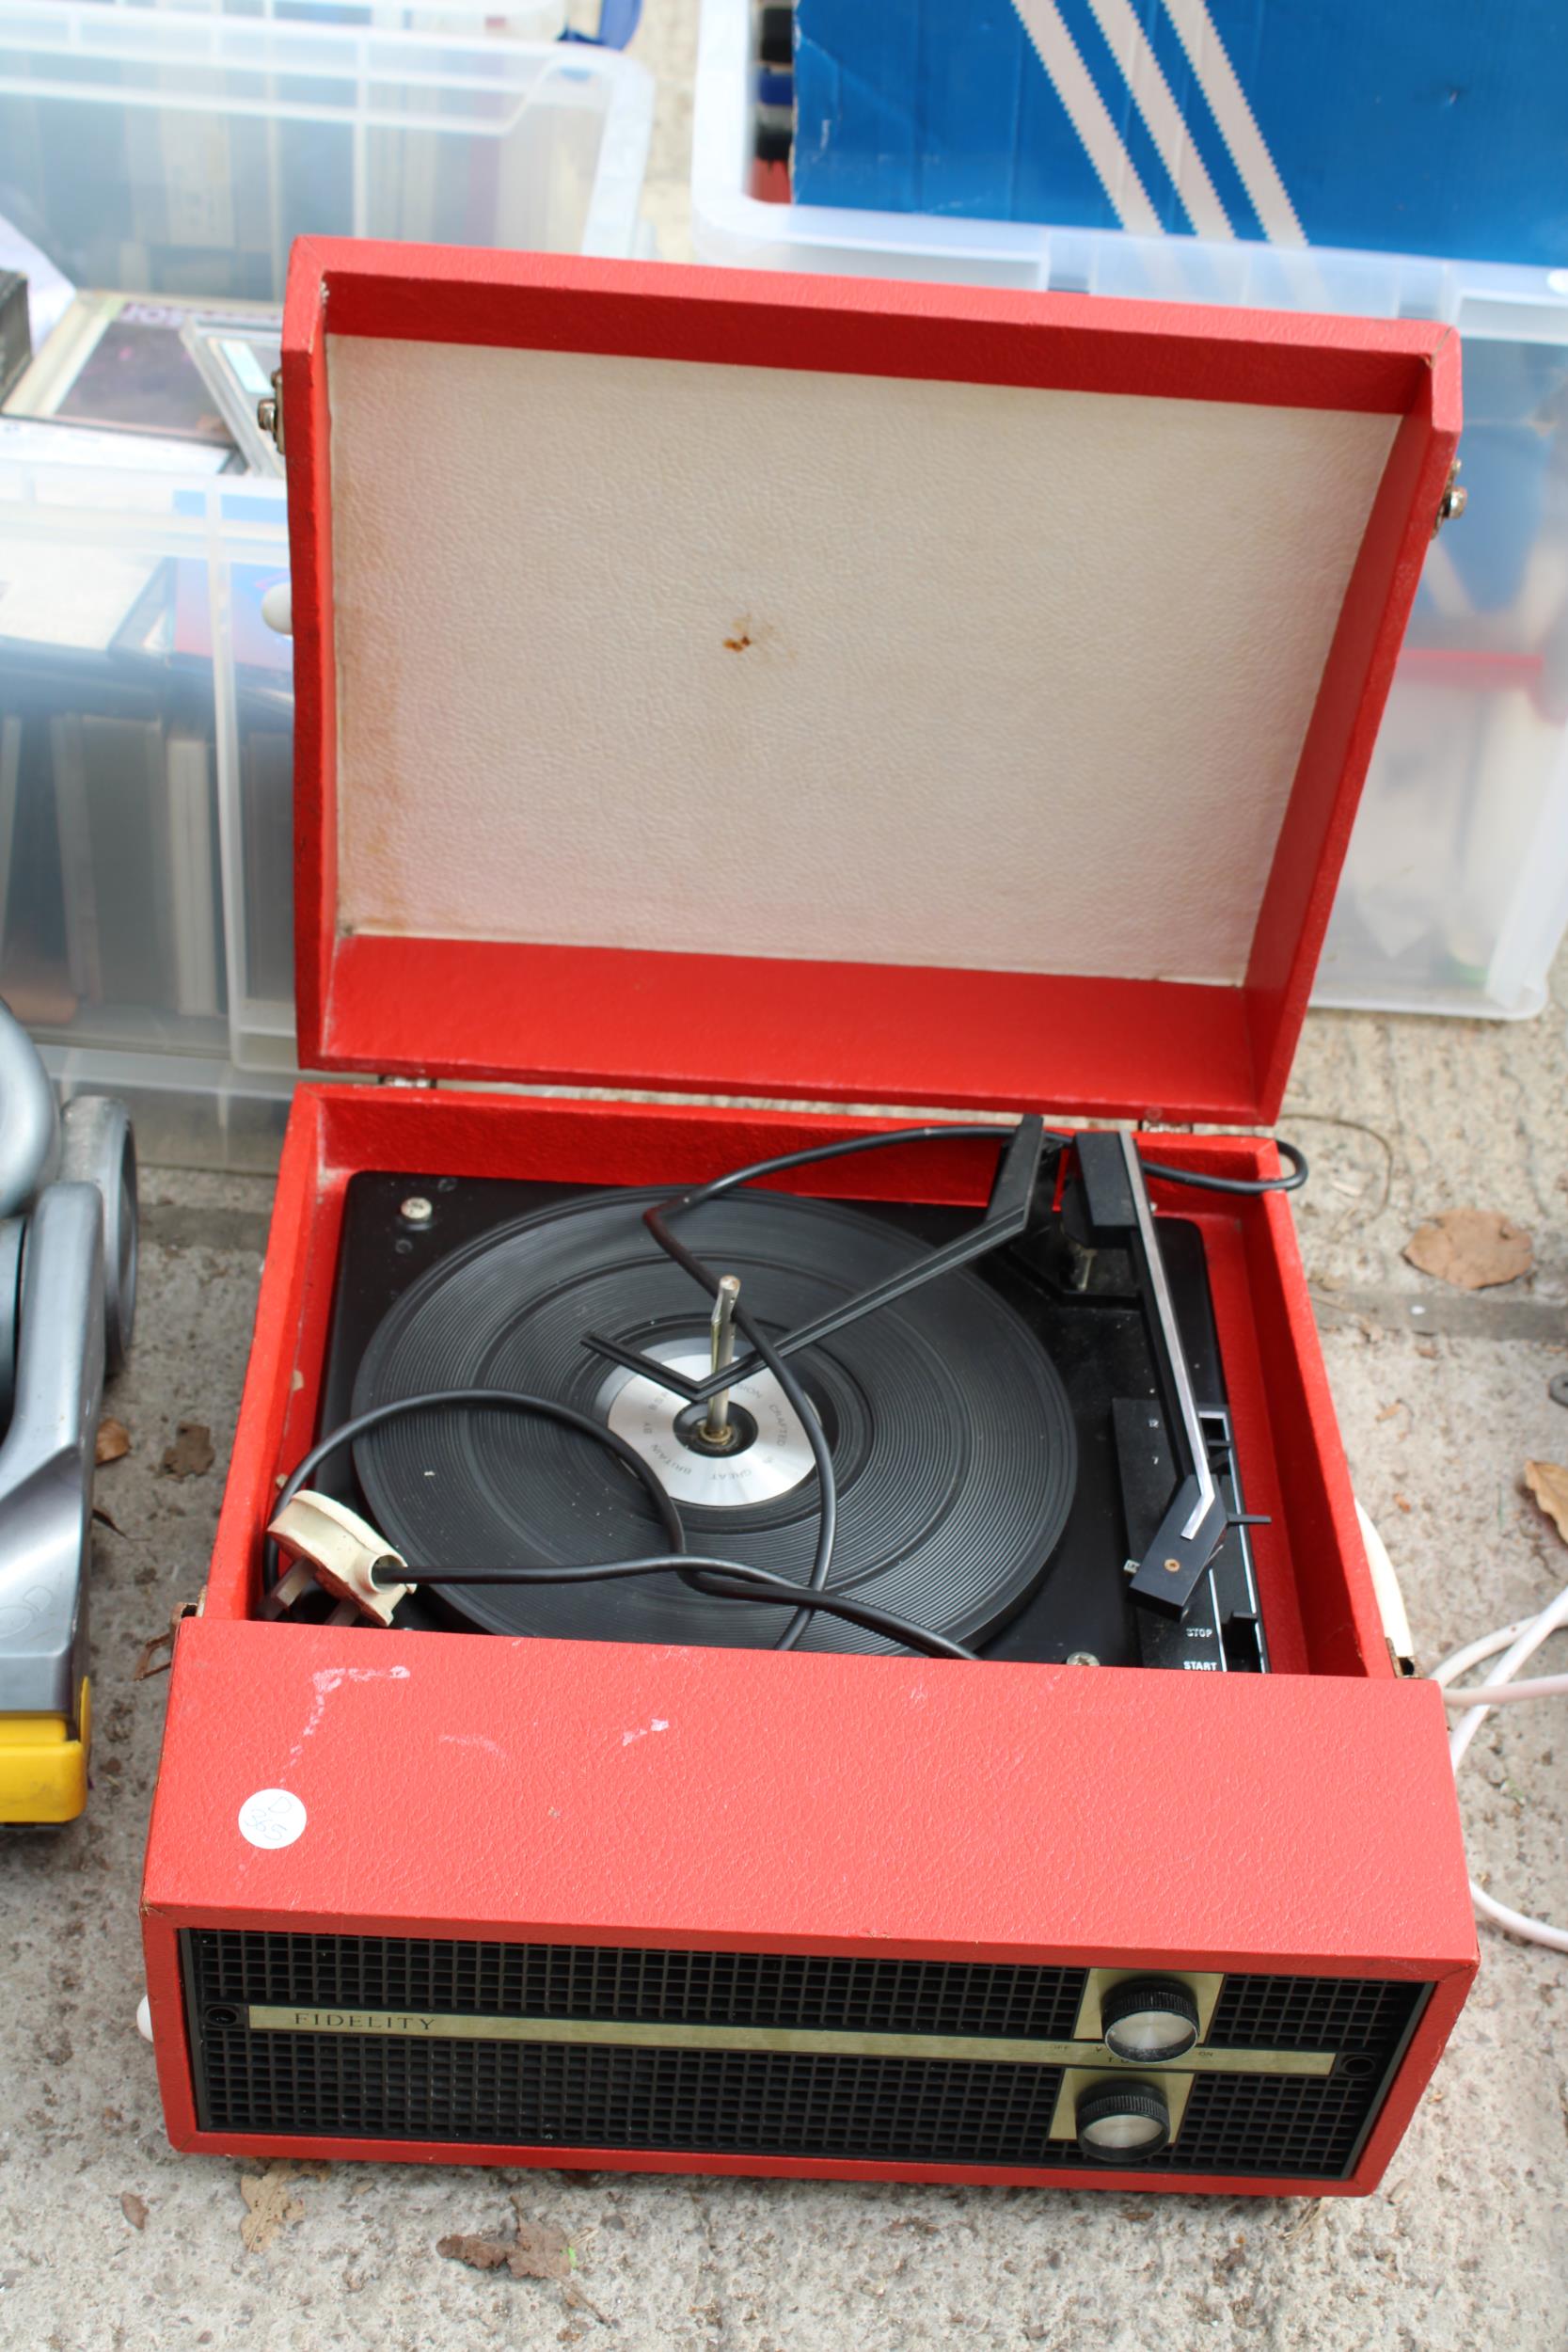 A FIDELITY RECORD PLAYER